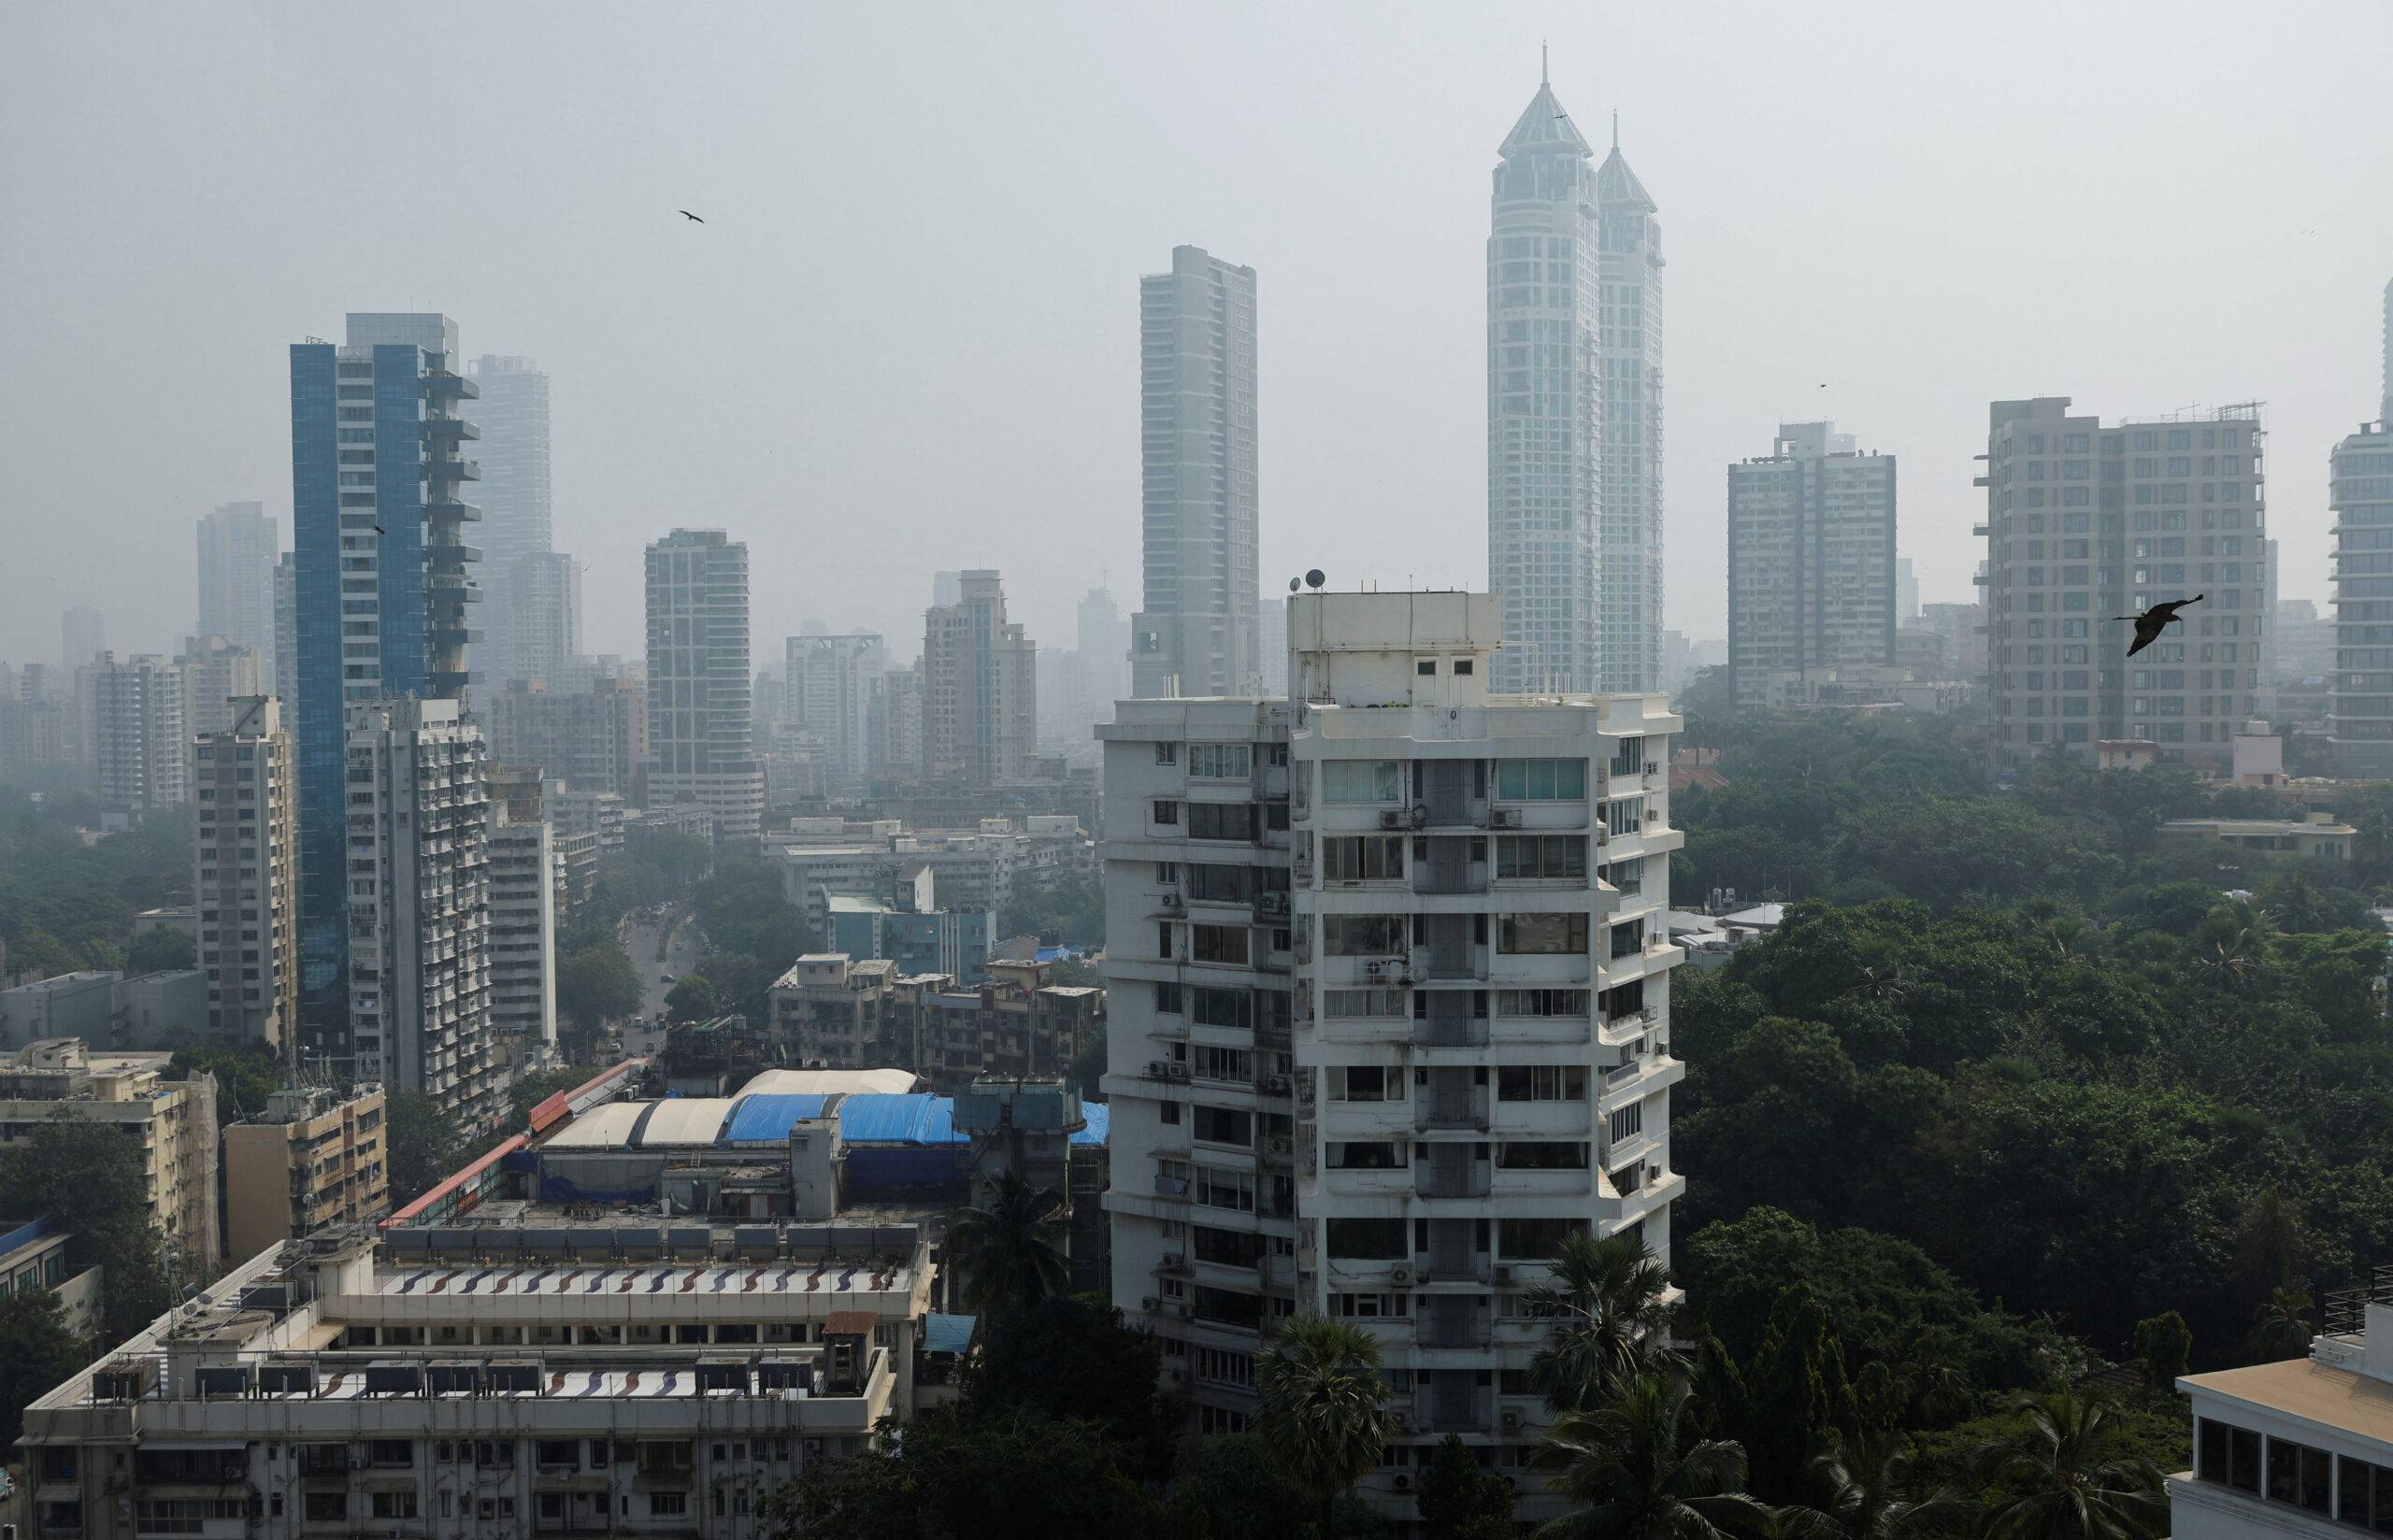 India's construction sector levels up as housing demand spurs economy